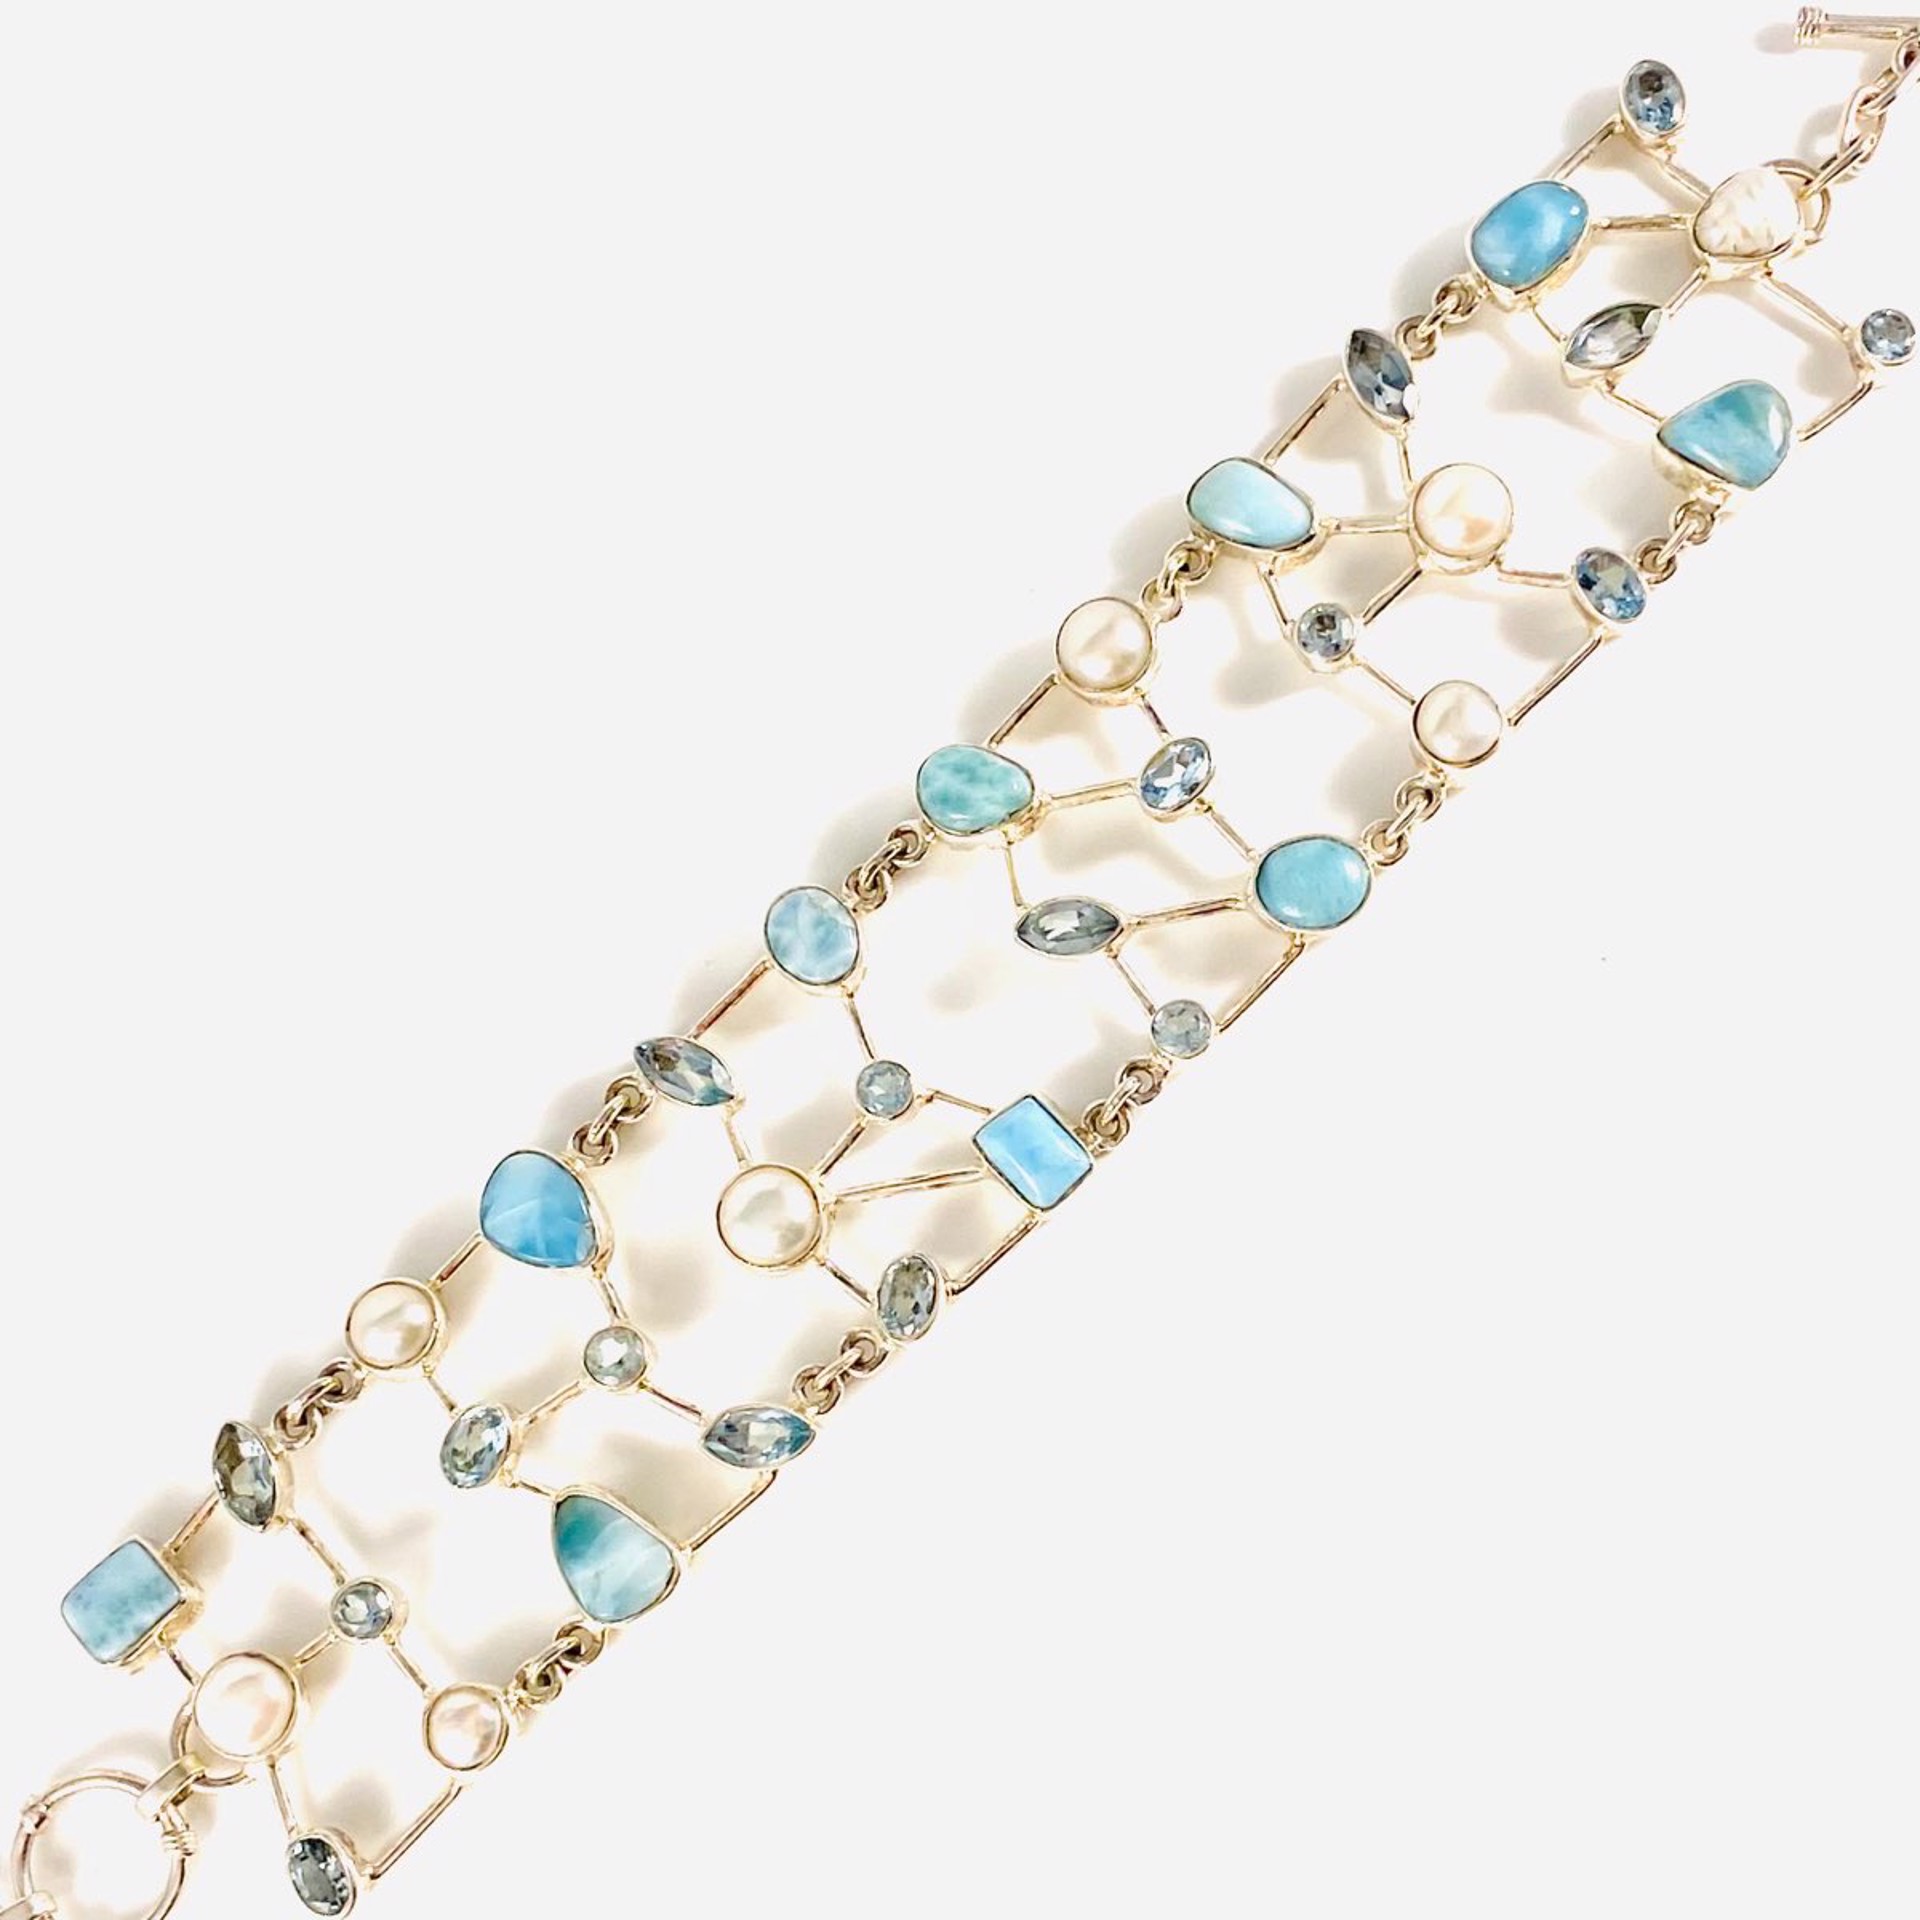 One of A Kind Larimar Blue Topaz Pearl Bracelet with 1.5" ext by Monica Mehta